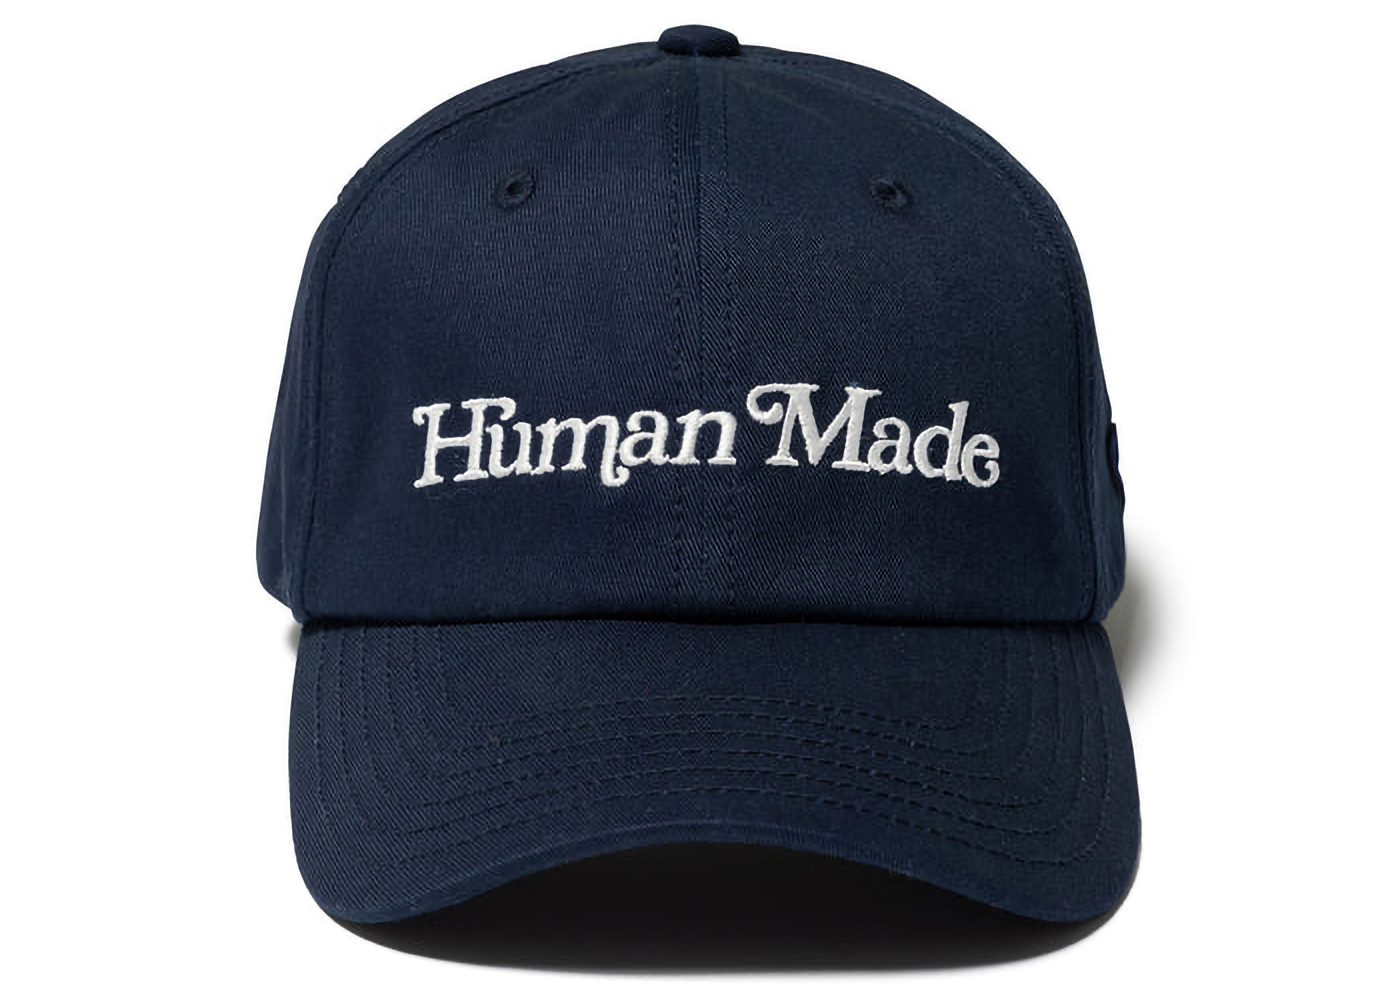 Human Made x Girls Don't Cry GDC White Day 6 Panel Cap Navy